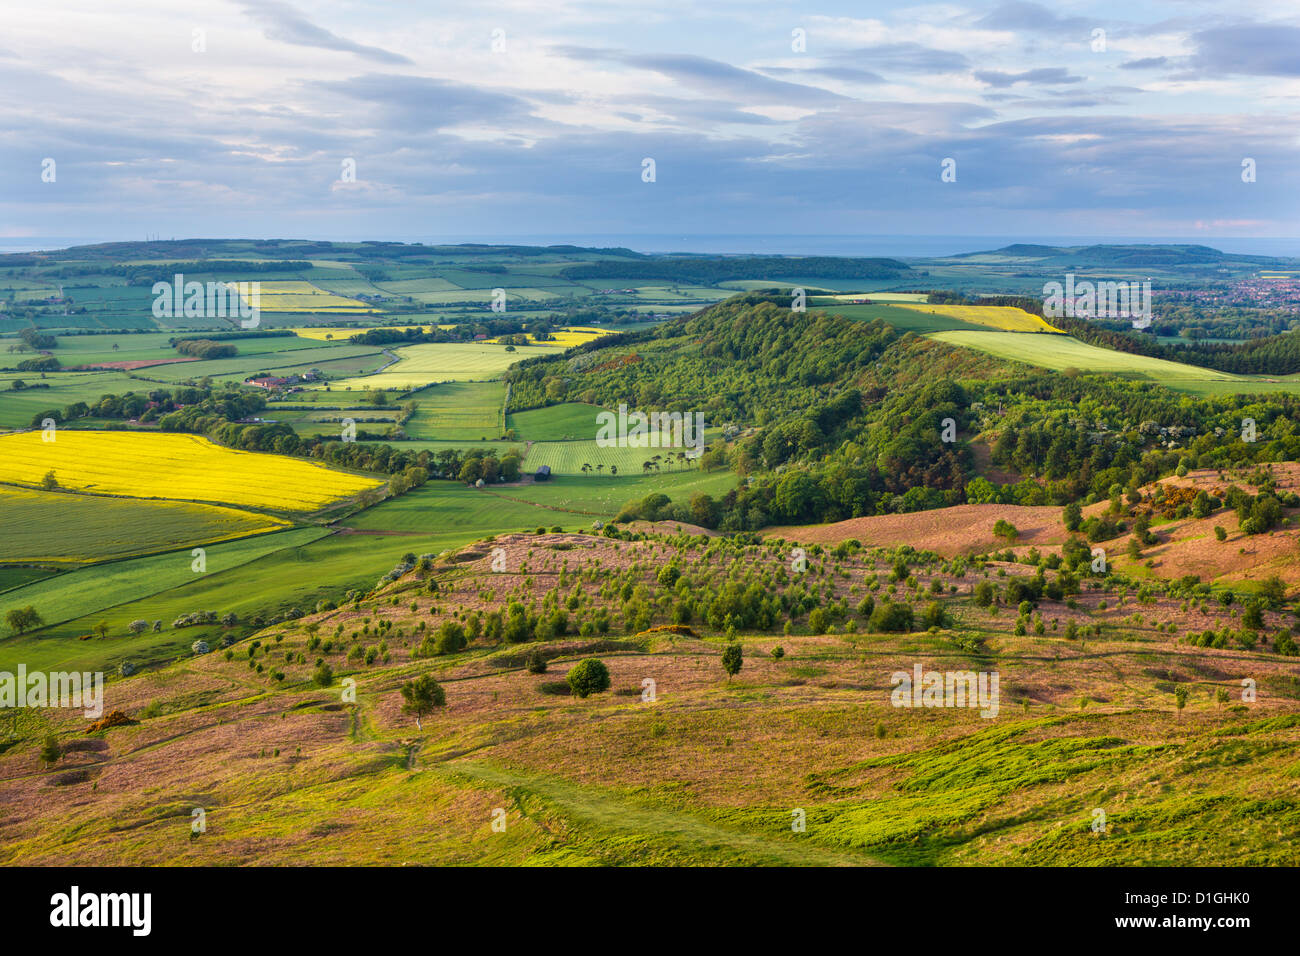 Looking towards Teesside from the top of Roseberry Topping, Great Ayton, North Yorkshire, Yorkshire, England, United Kingdom Stock Photo